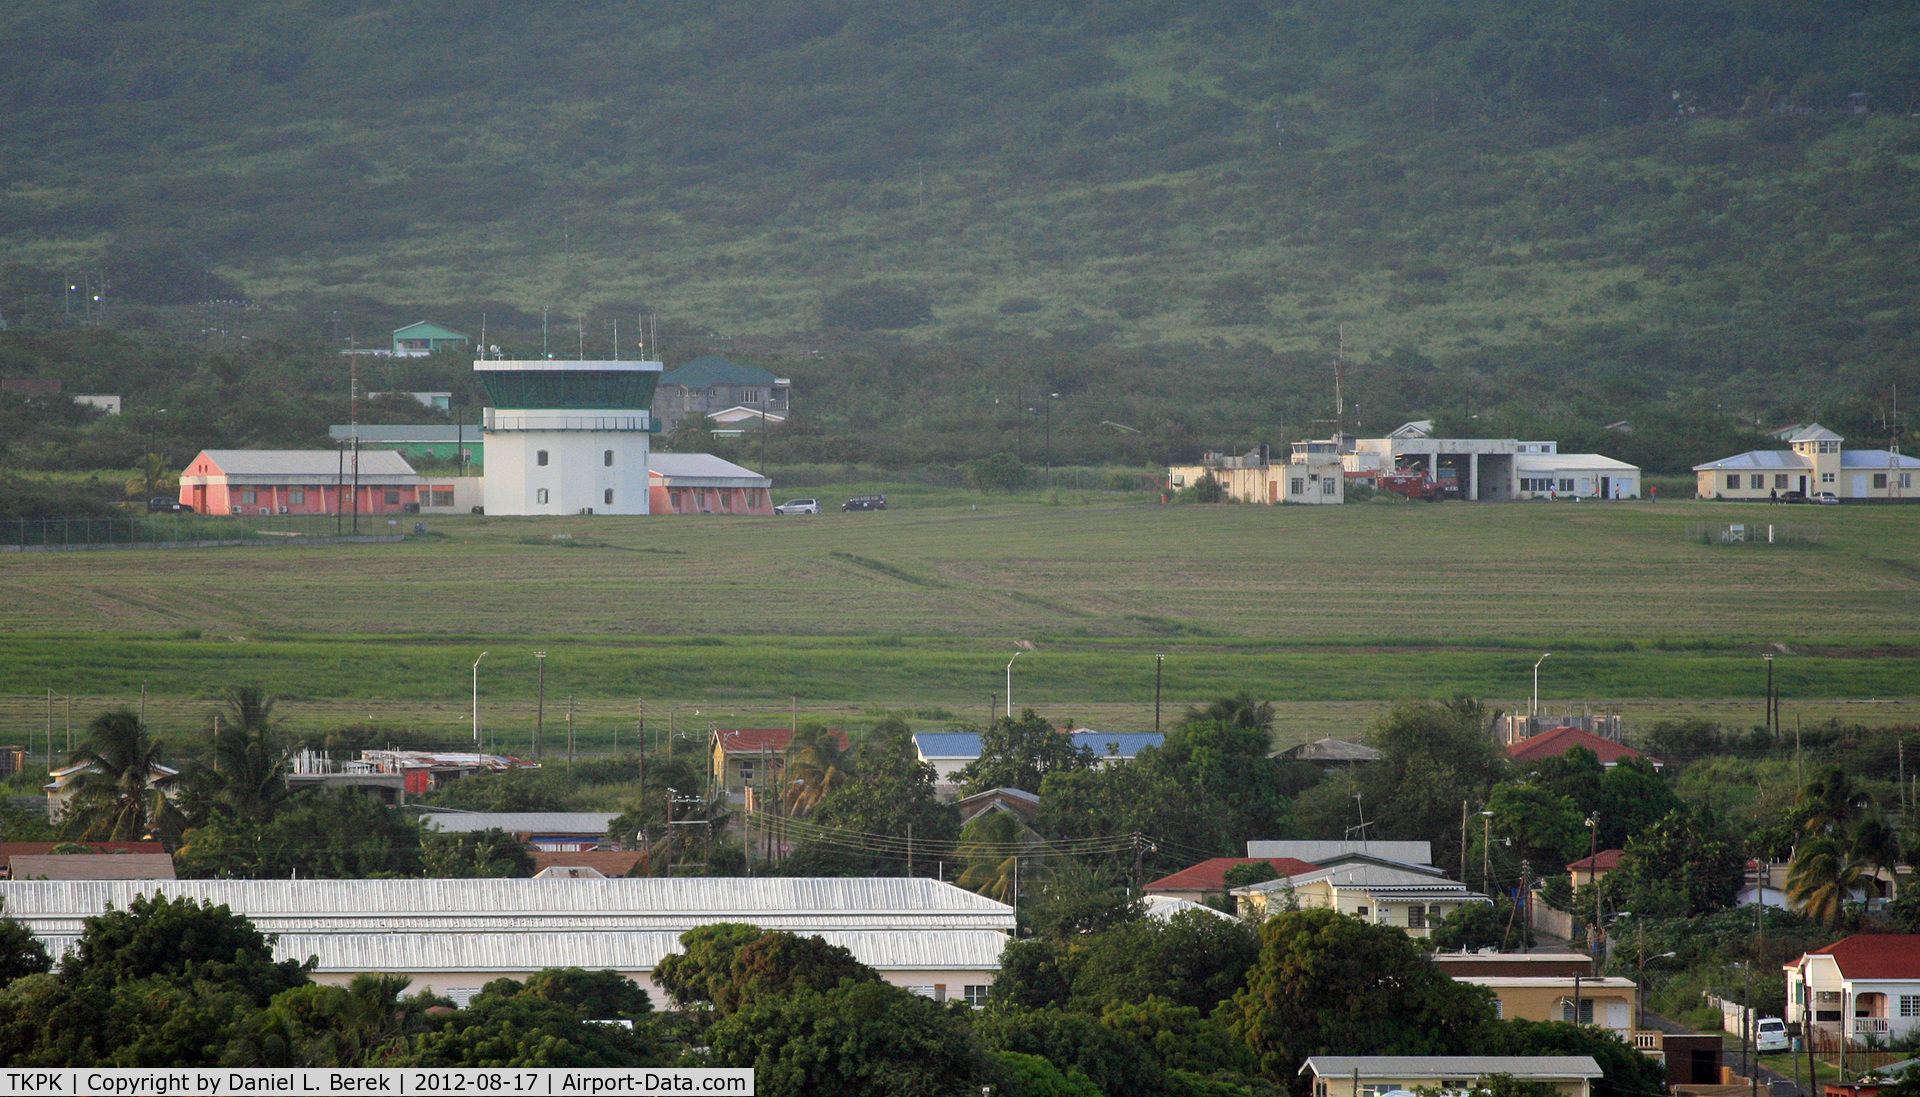 Robert L. Bradshaw International Airport, Basseterre, Saint Kitts Saint Kitts and Nevis (TKPK) - The older terminal at the northern end of the airport.